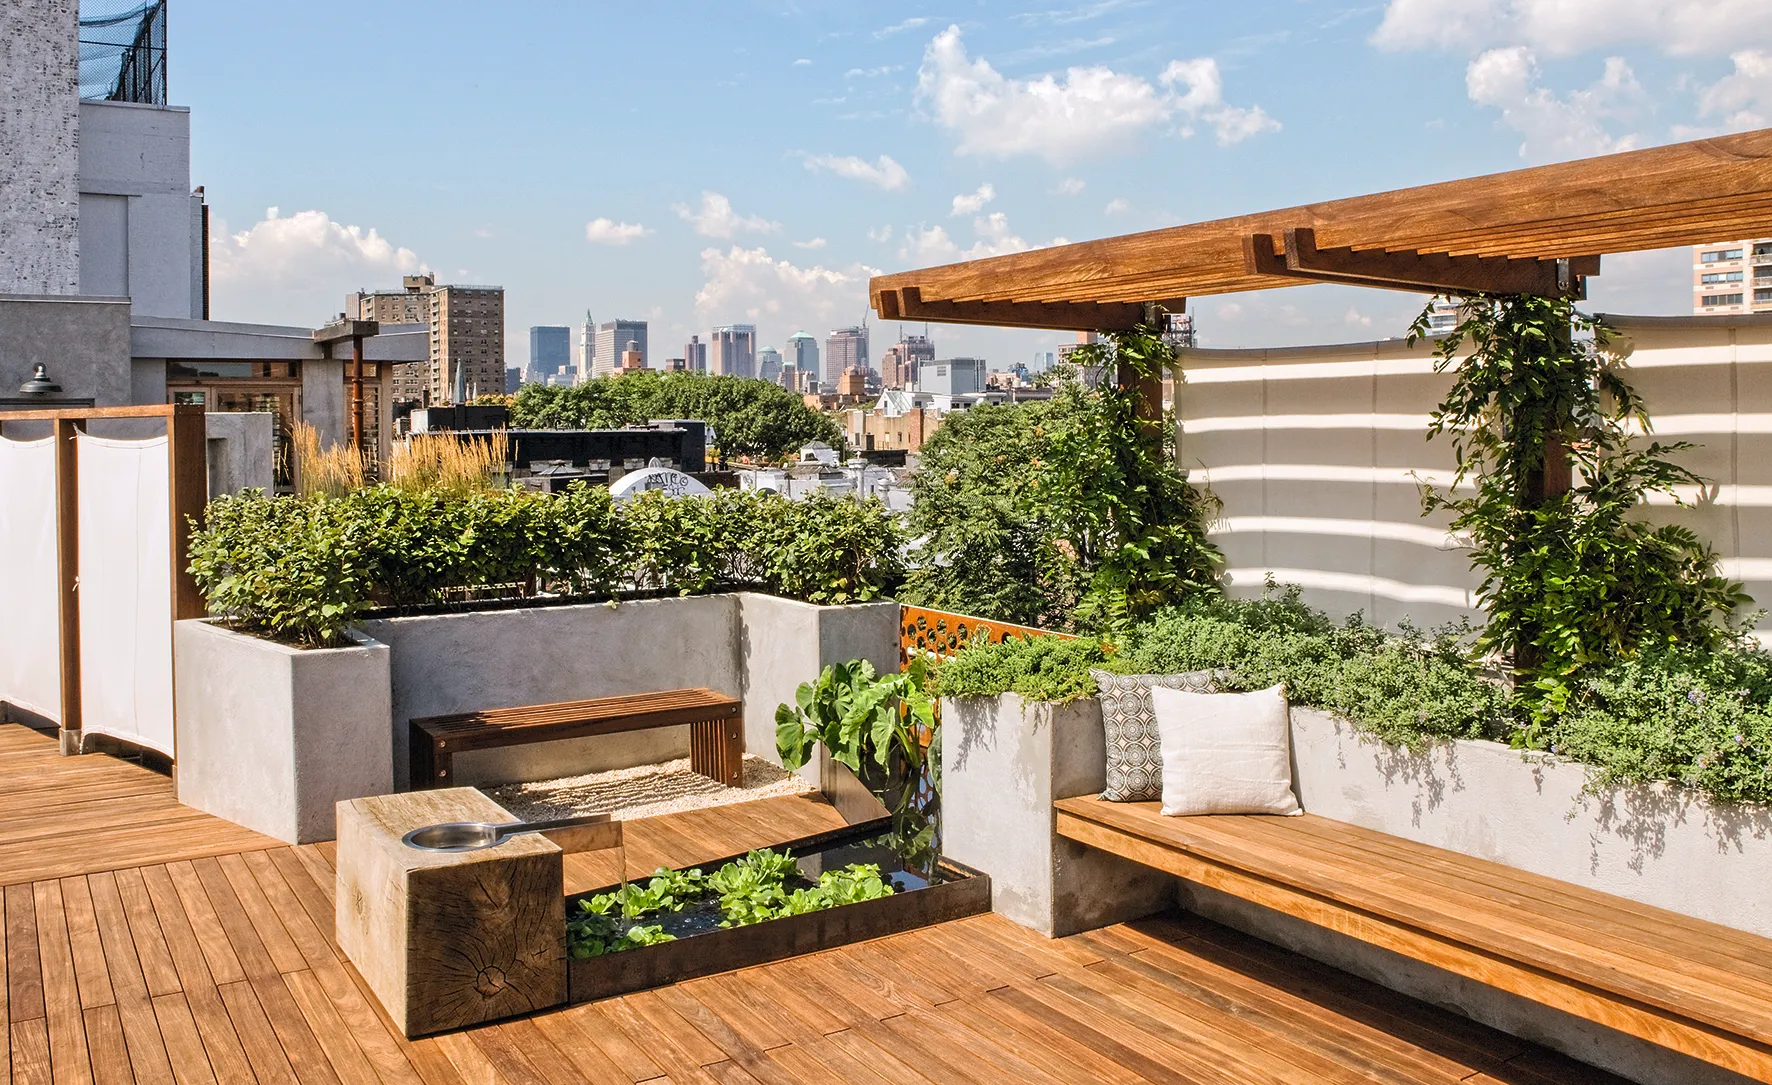 “Highrise Horticulture: Designing and Maintaining Stunning Rooftop Gardens”